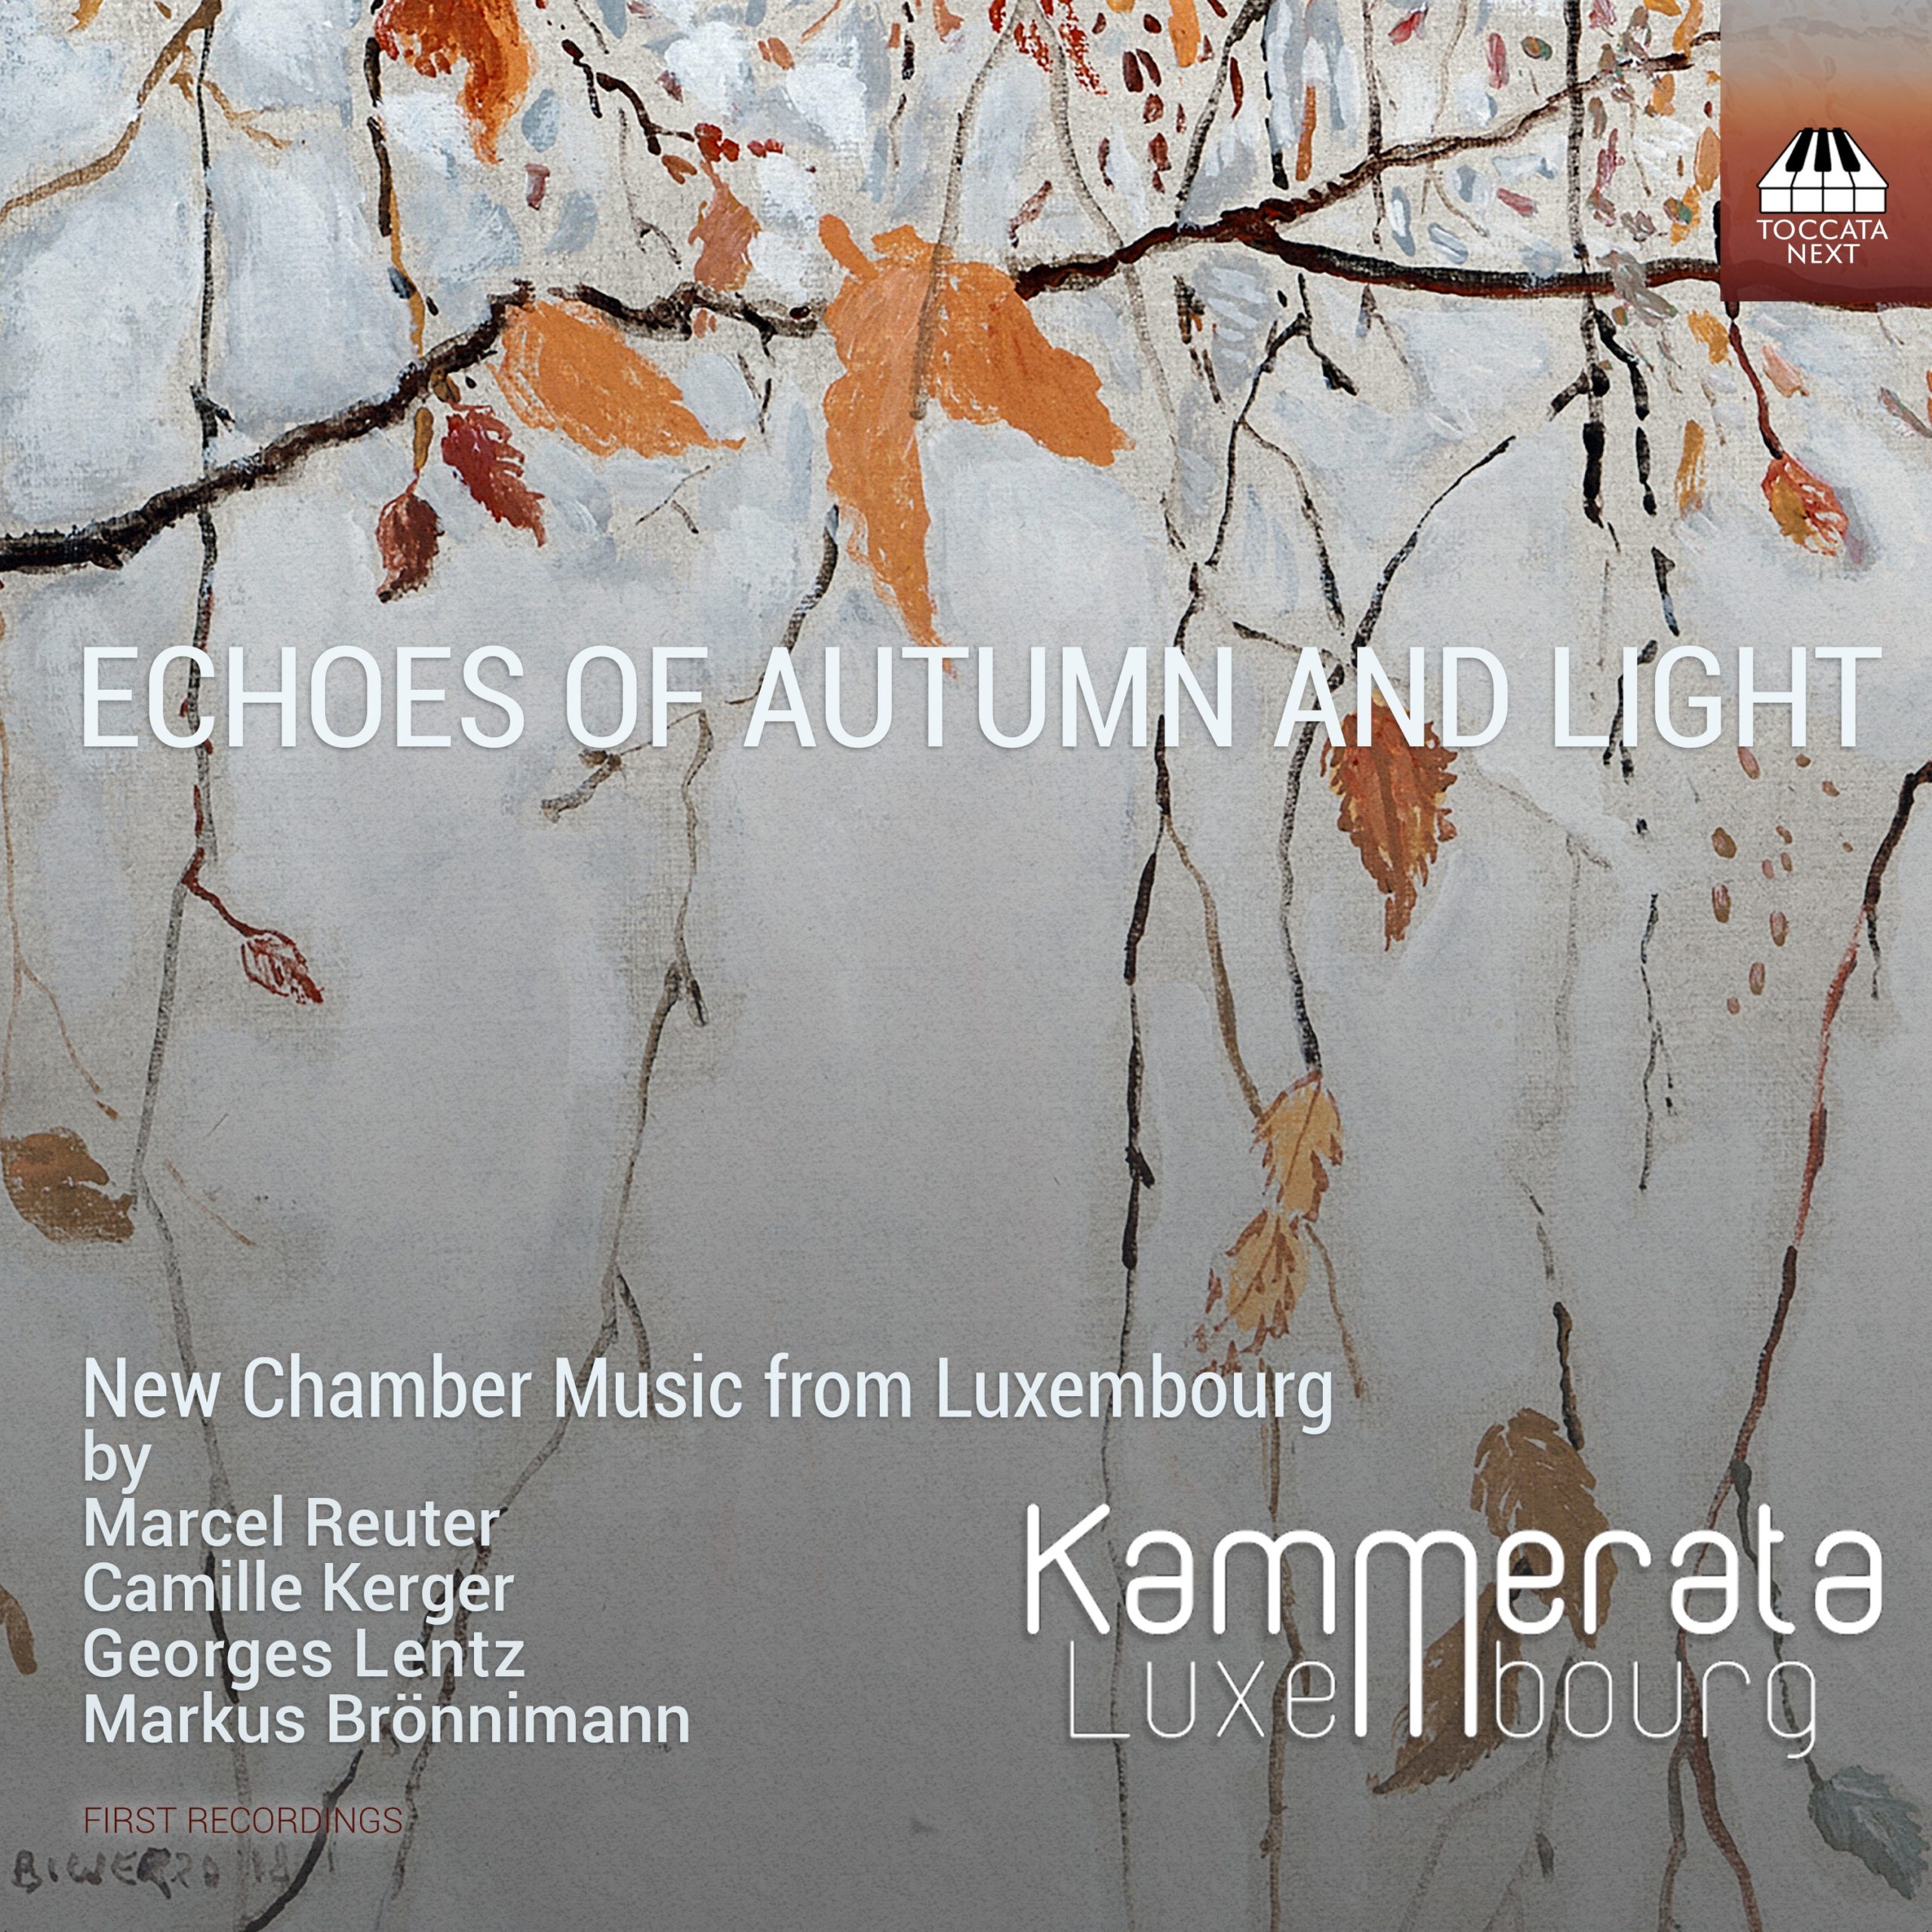 Kammerata Luxembourg - Echoes of Autumn and Light: New Chamber Music from Luxembourg (2021) [FLAC 24bit/96kHz]